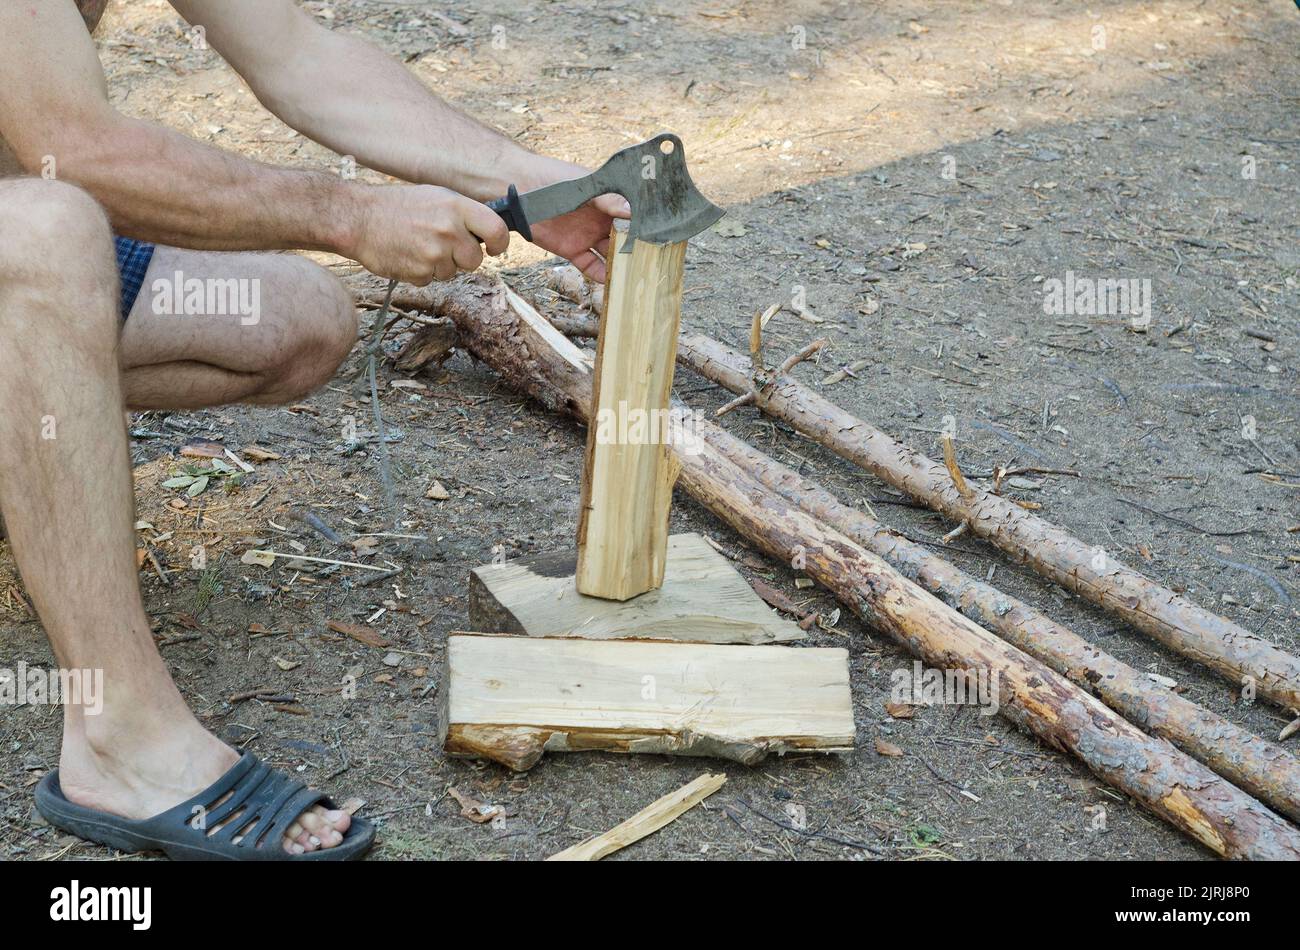 a man chops wood with an axe for heating. Stock Photo